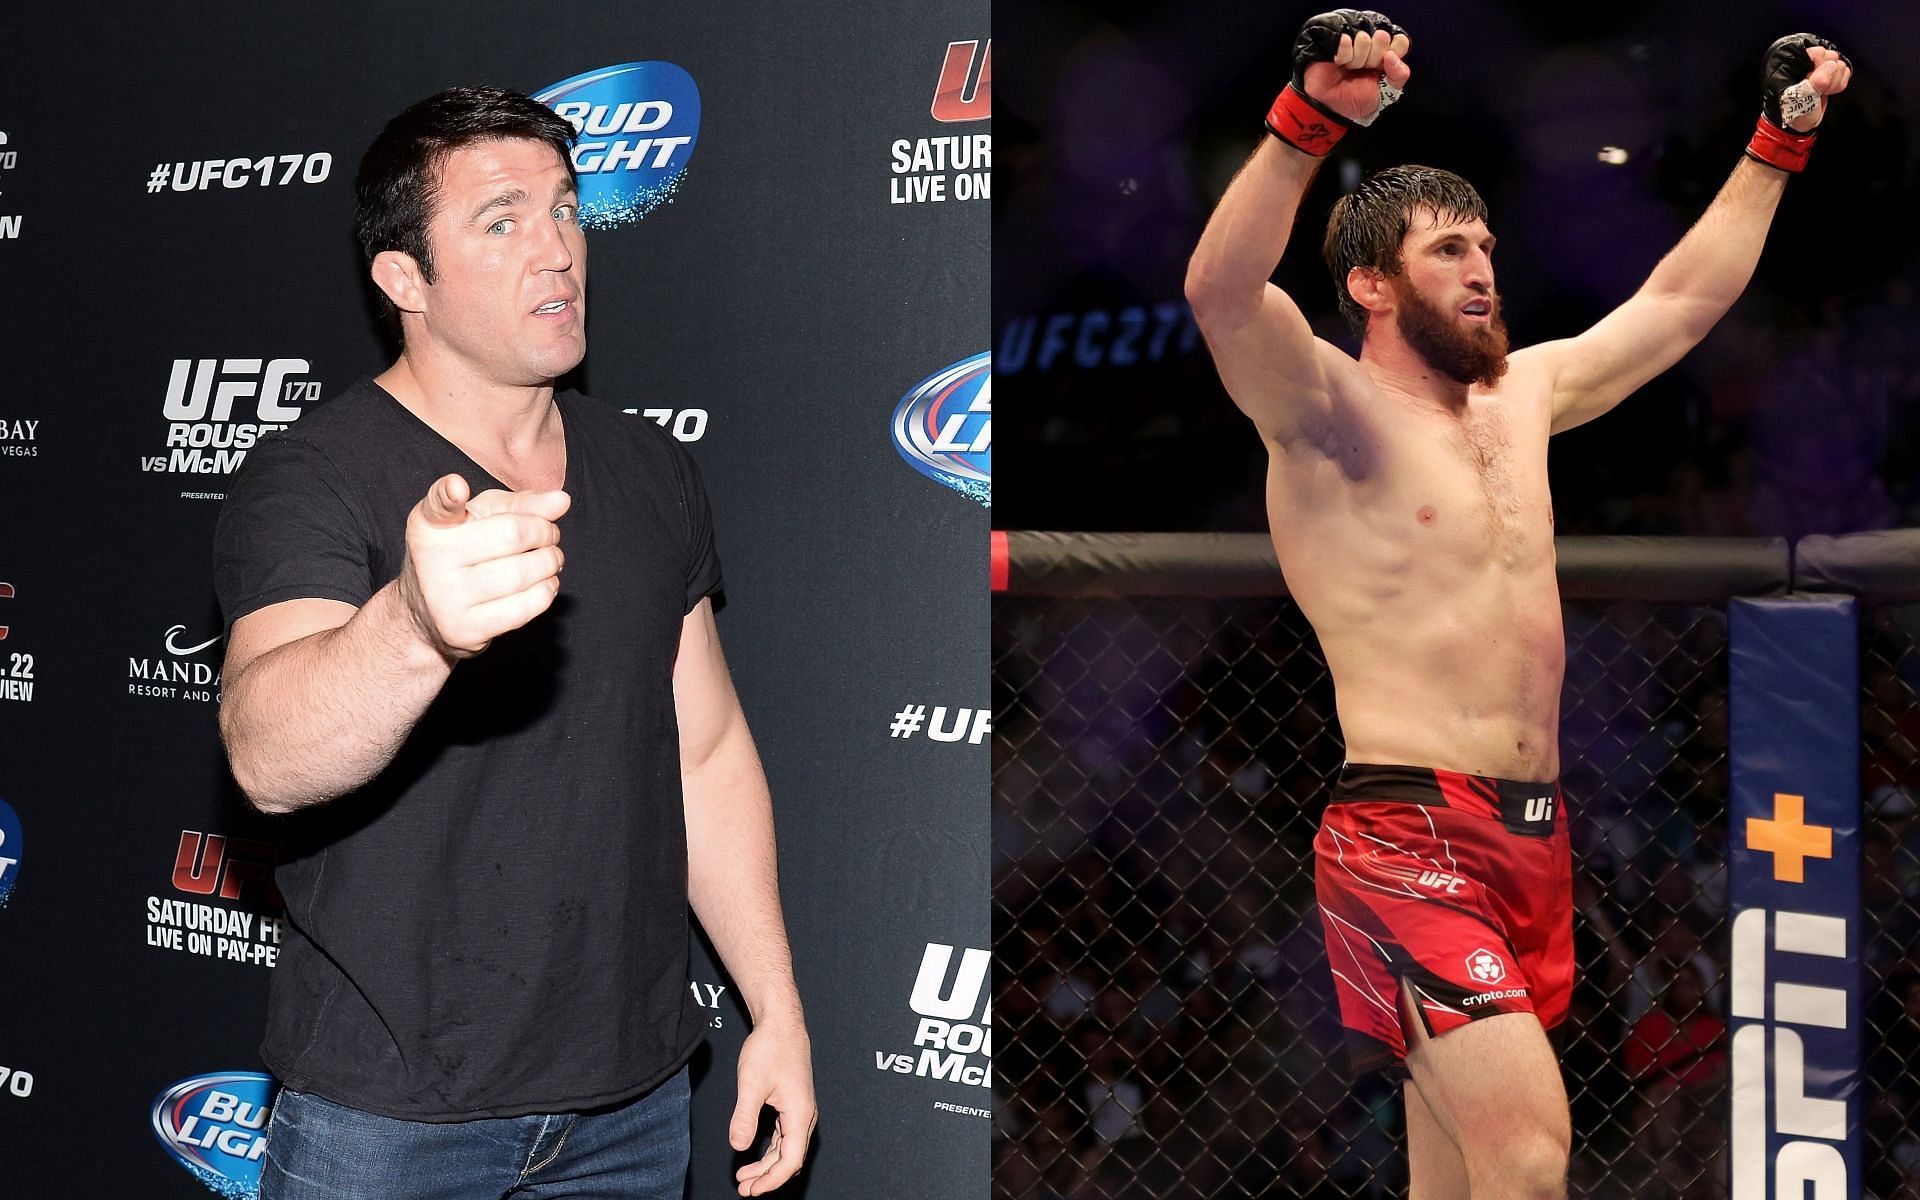 Chael Sonnen (left), Magomed Ankalaev (right) [Image credits: Getty]